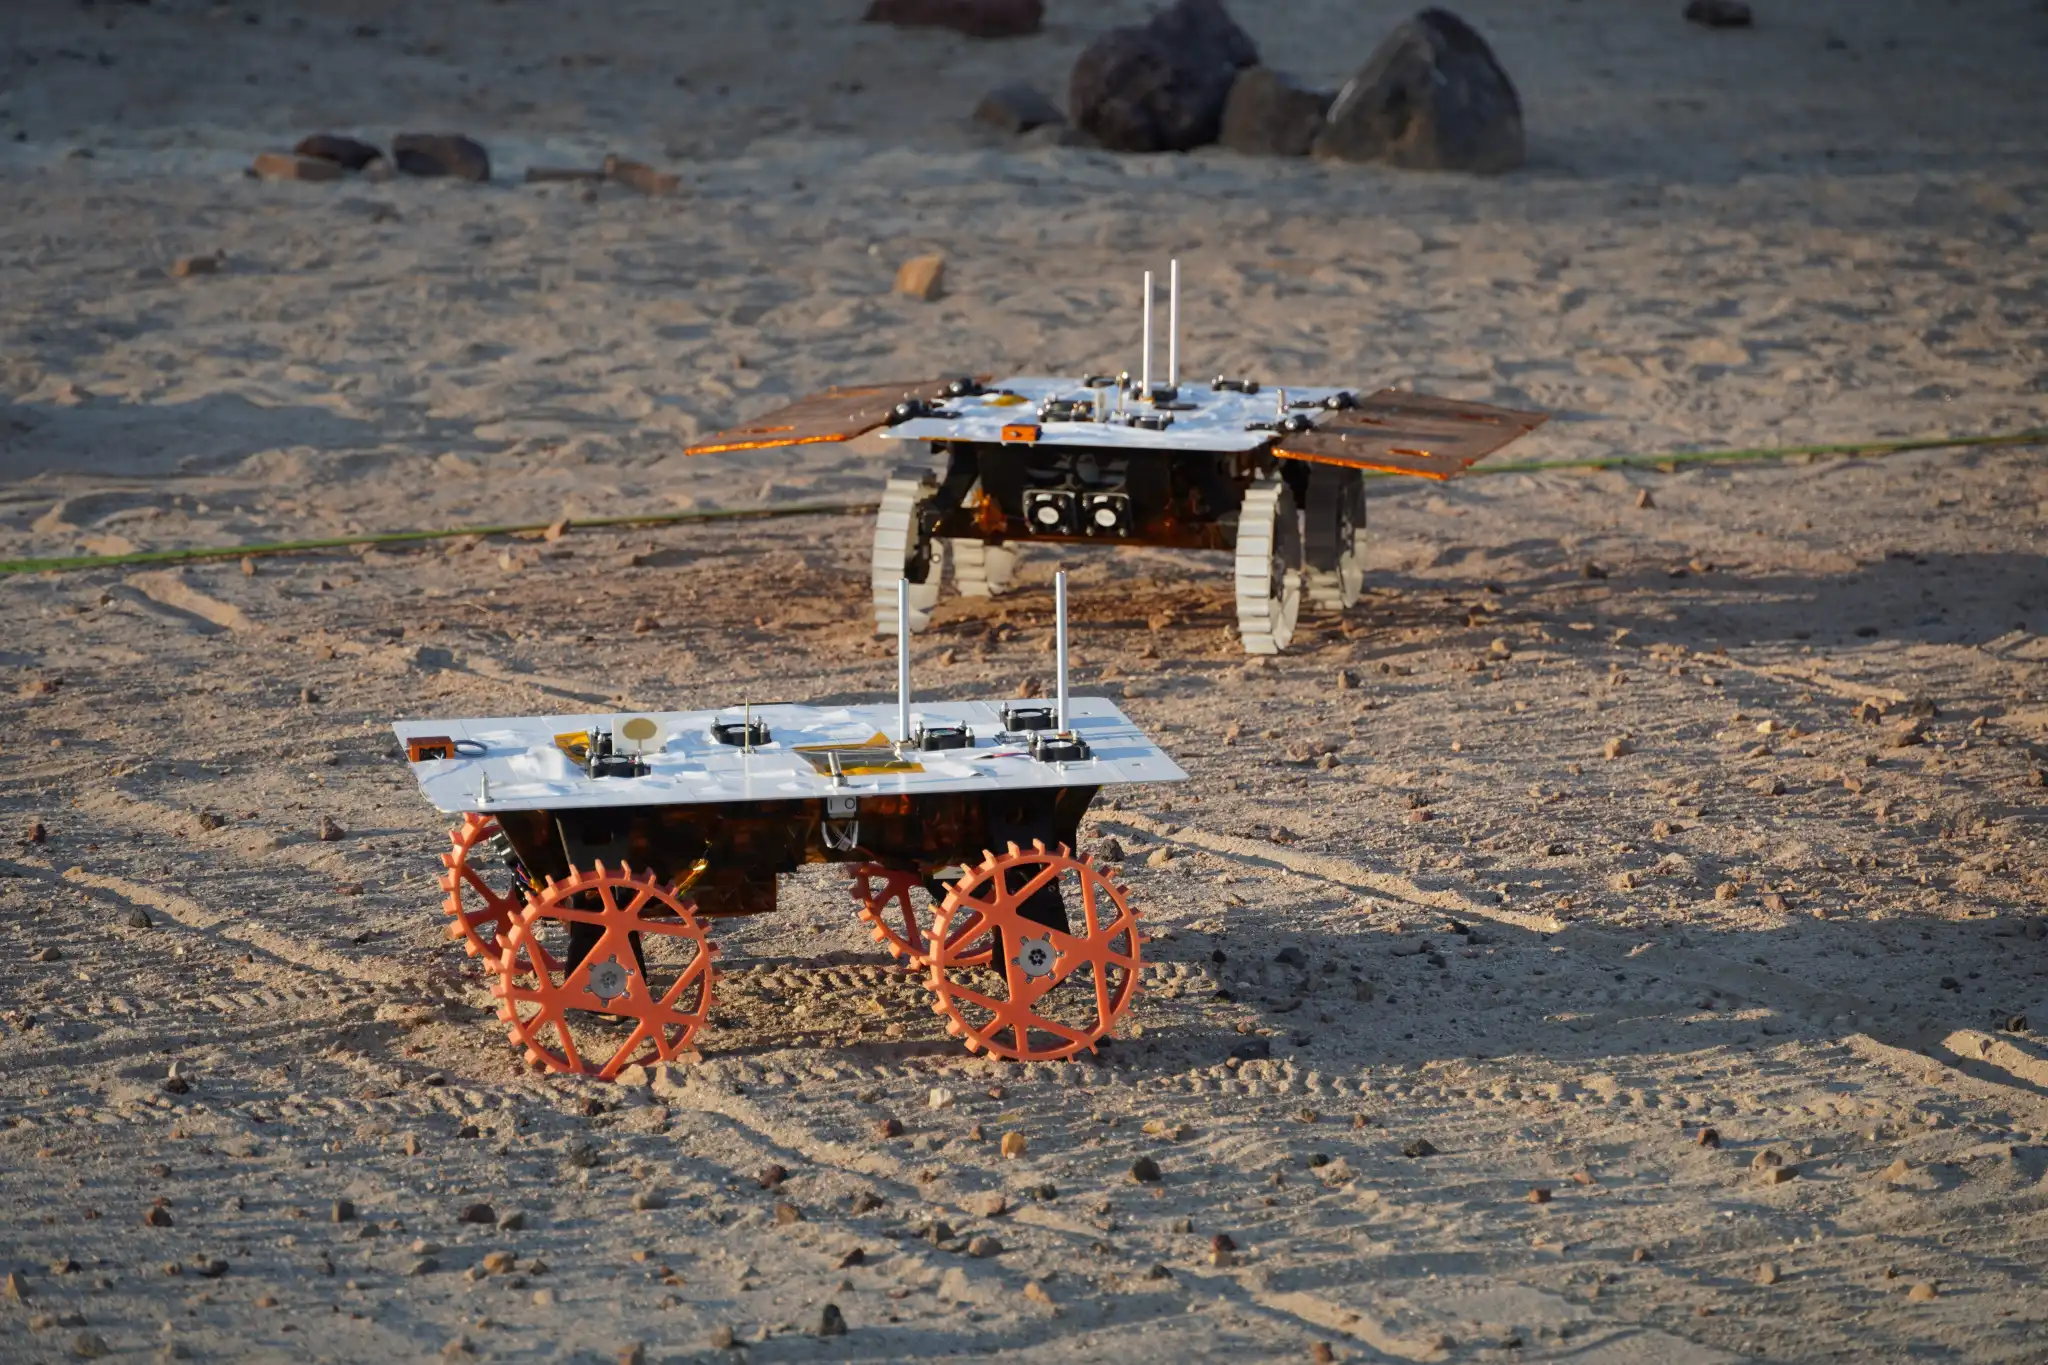 A team of small lunar rovers